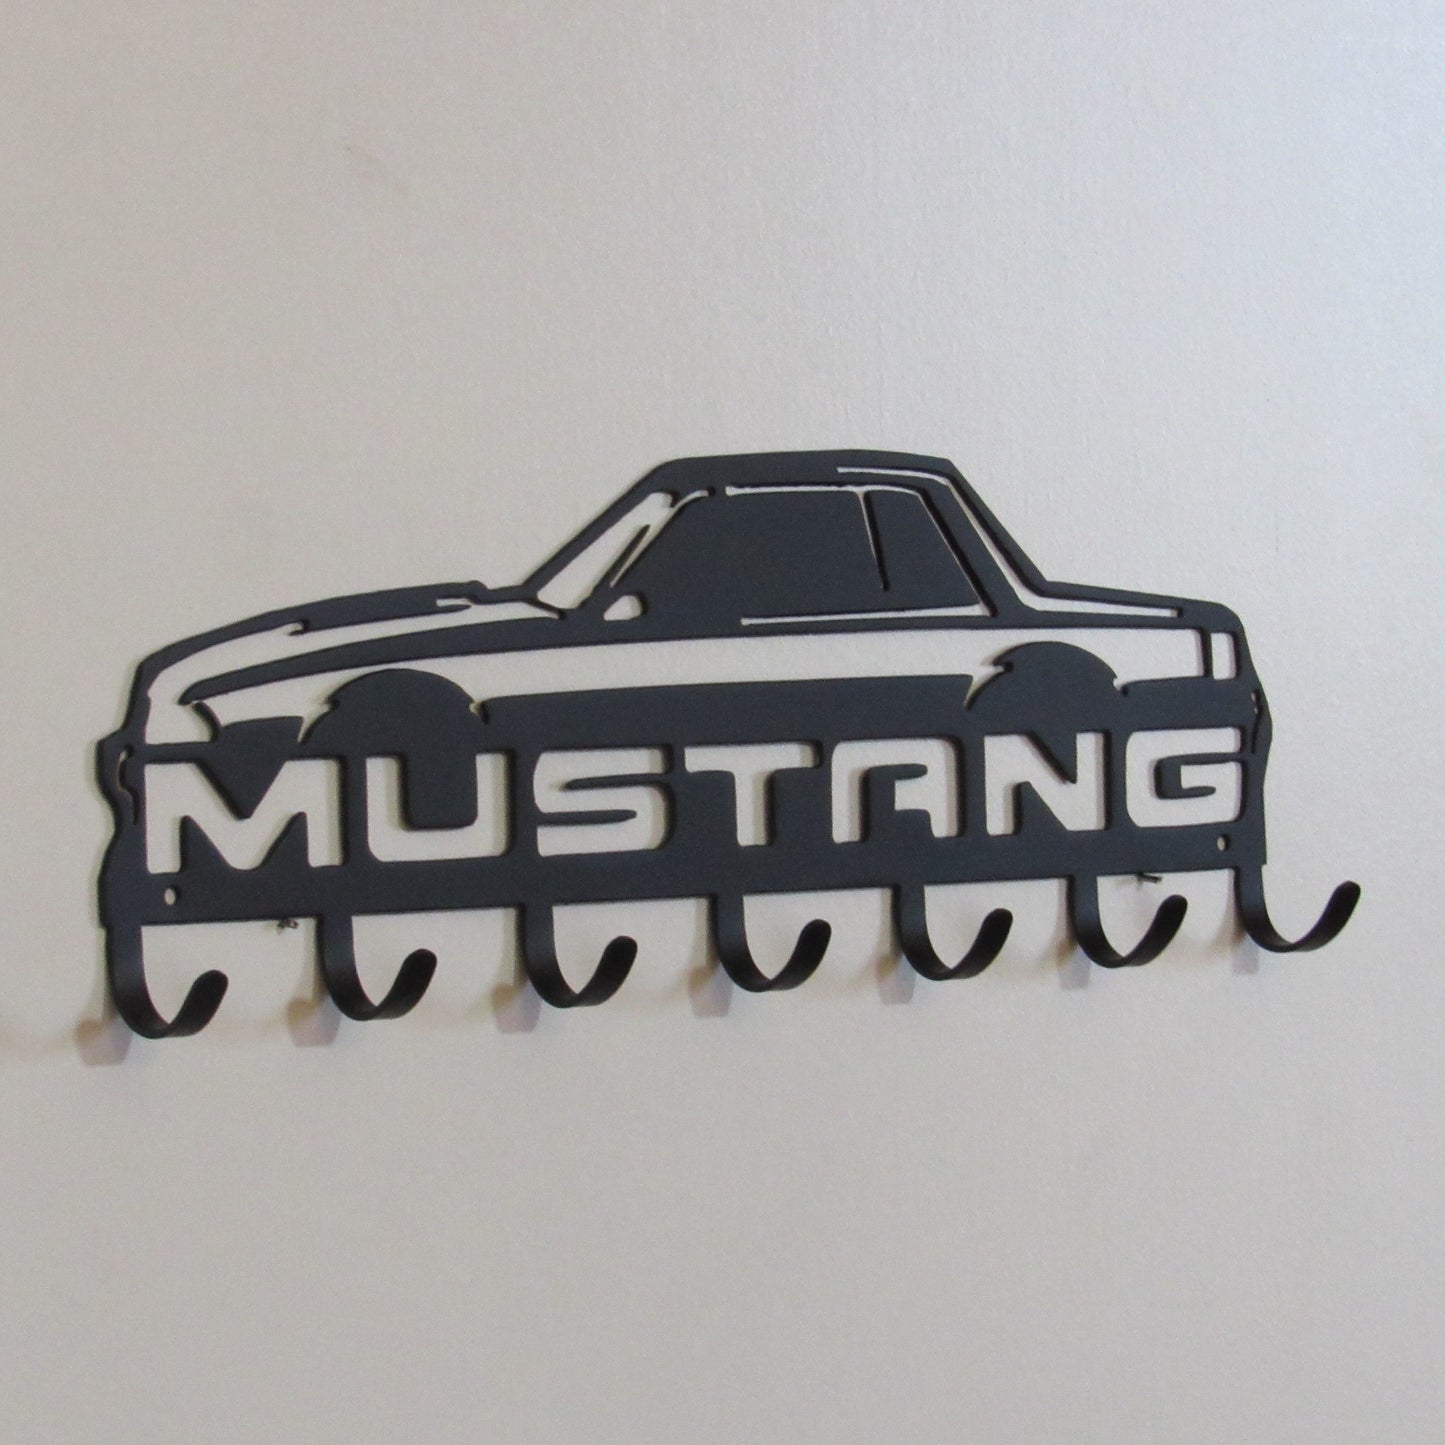 Mustang Fox Coupe Key/Hat Rack